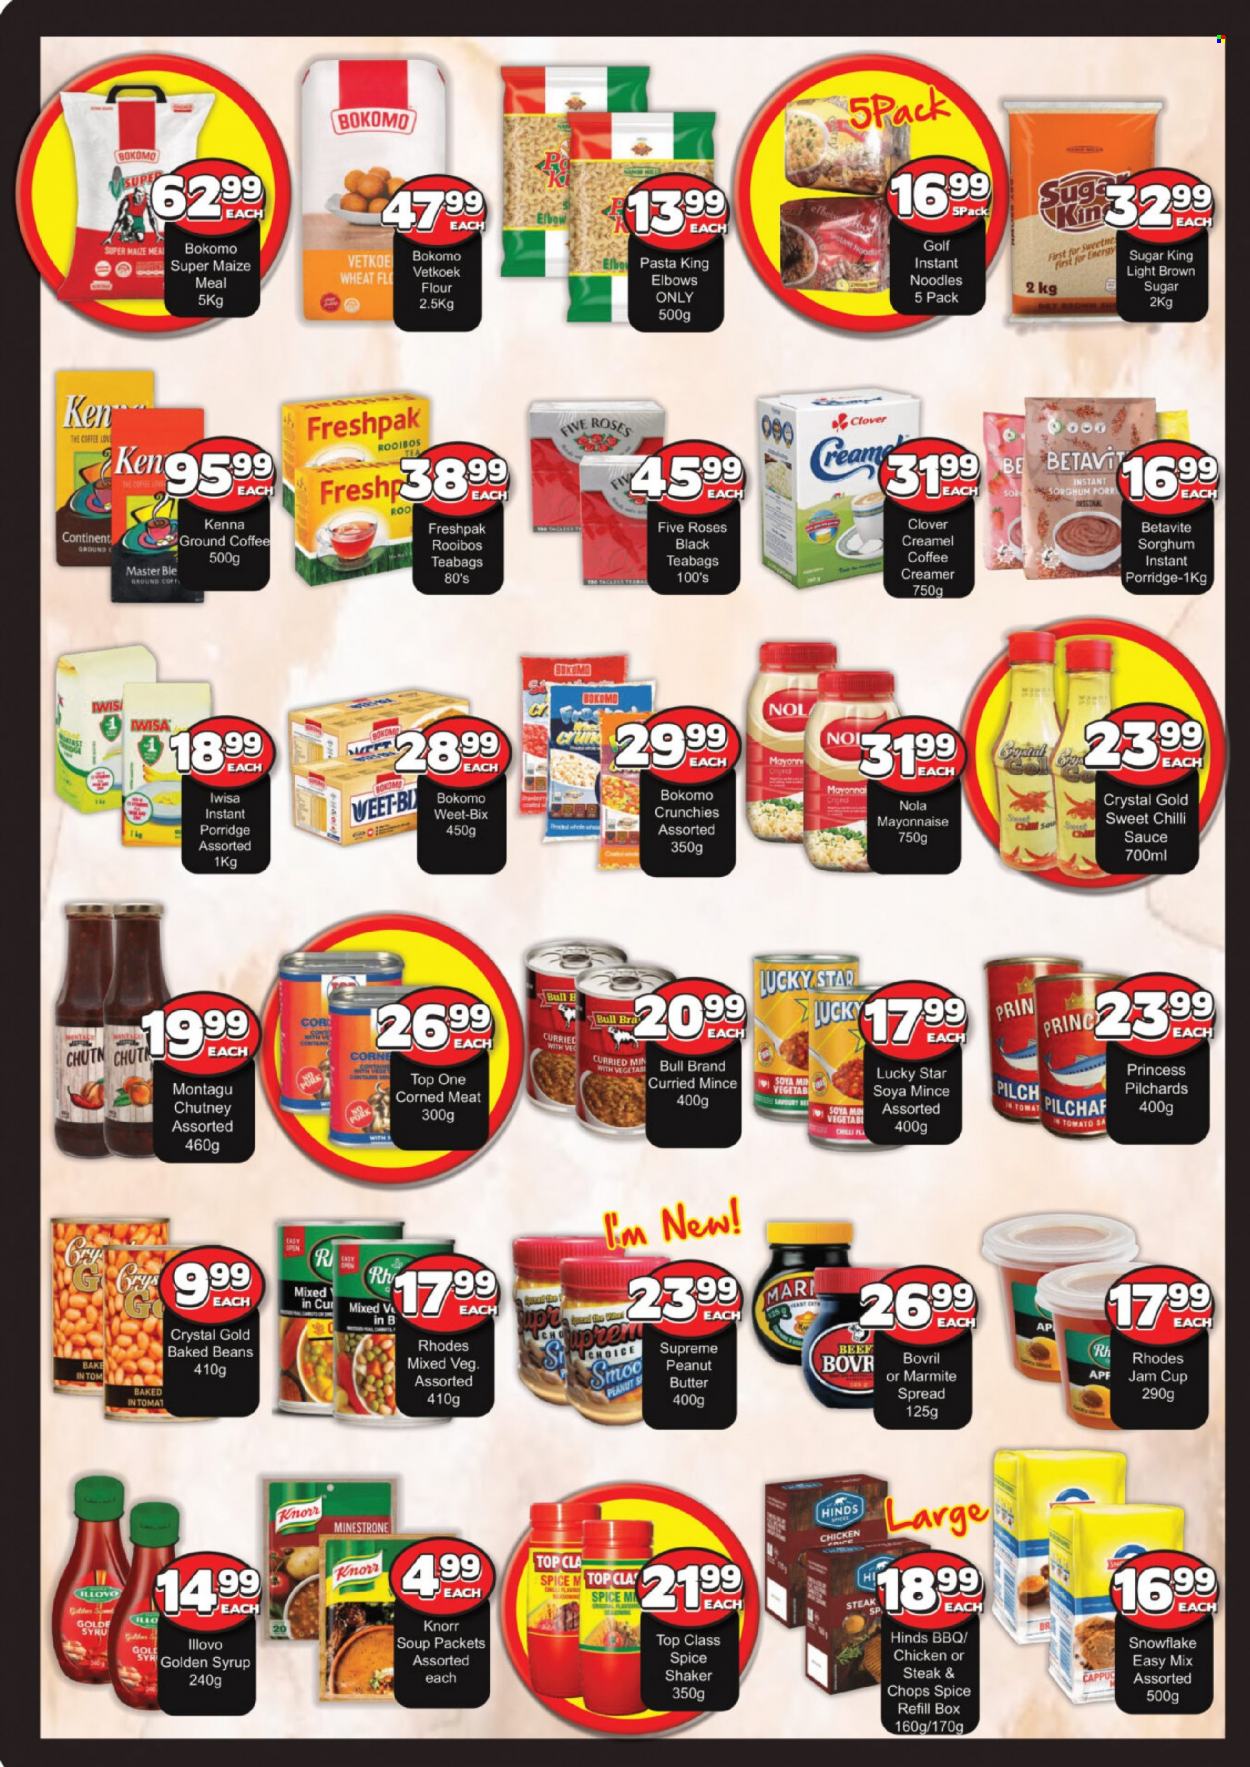 thumbnail - Metro catalogue  - 19/01/2023 - 05/02/2023 - Sales products - sardines, soup, pasta, instant noodles, Knorr, noodles, Clover, yeast, butter, creamer, mayonnaise, cereal bar, cane sugar, flour, maize meal, soya mince, corned meat, baked beans, Weet-Bix, porridge, instant porridge, spice, Hinds, chutney, sweet chilli sauce, fruit jam, syrup, tea bags, rooibos tea, ground coffee, steak. Page 3.